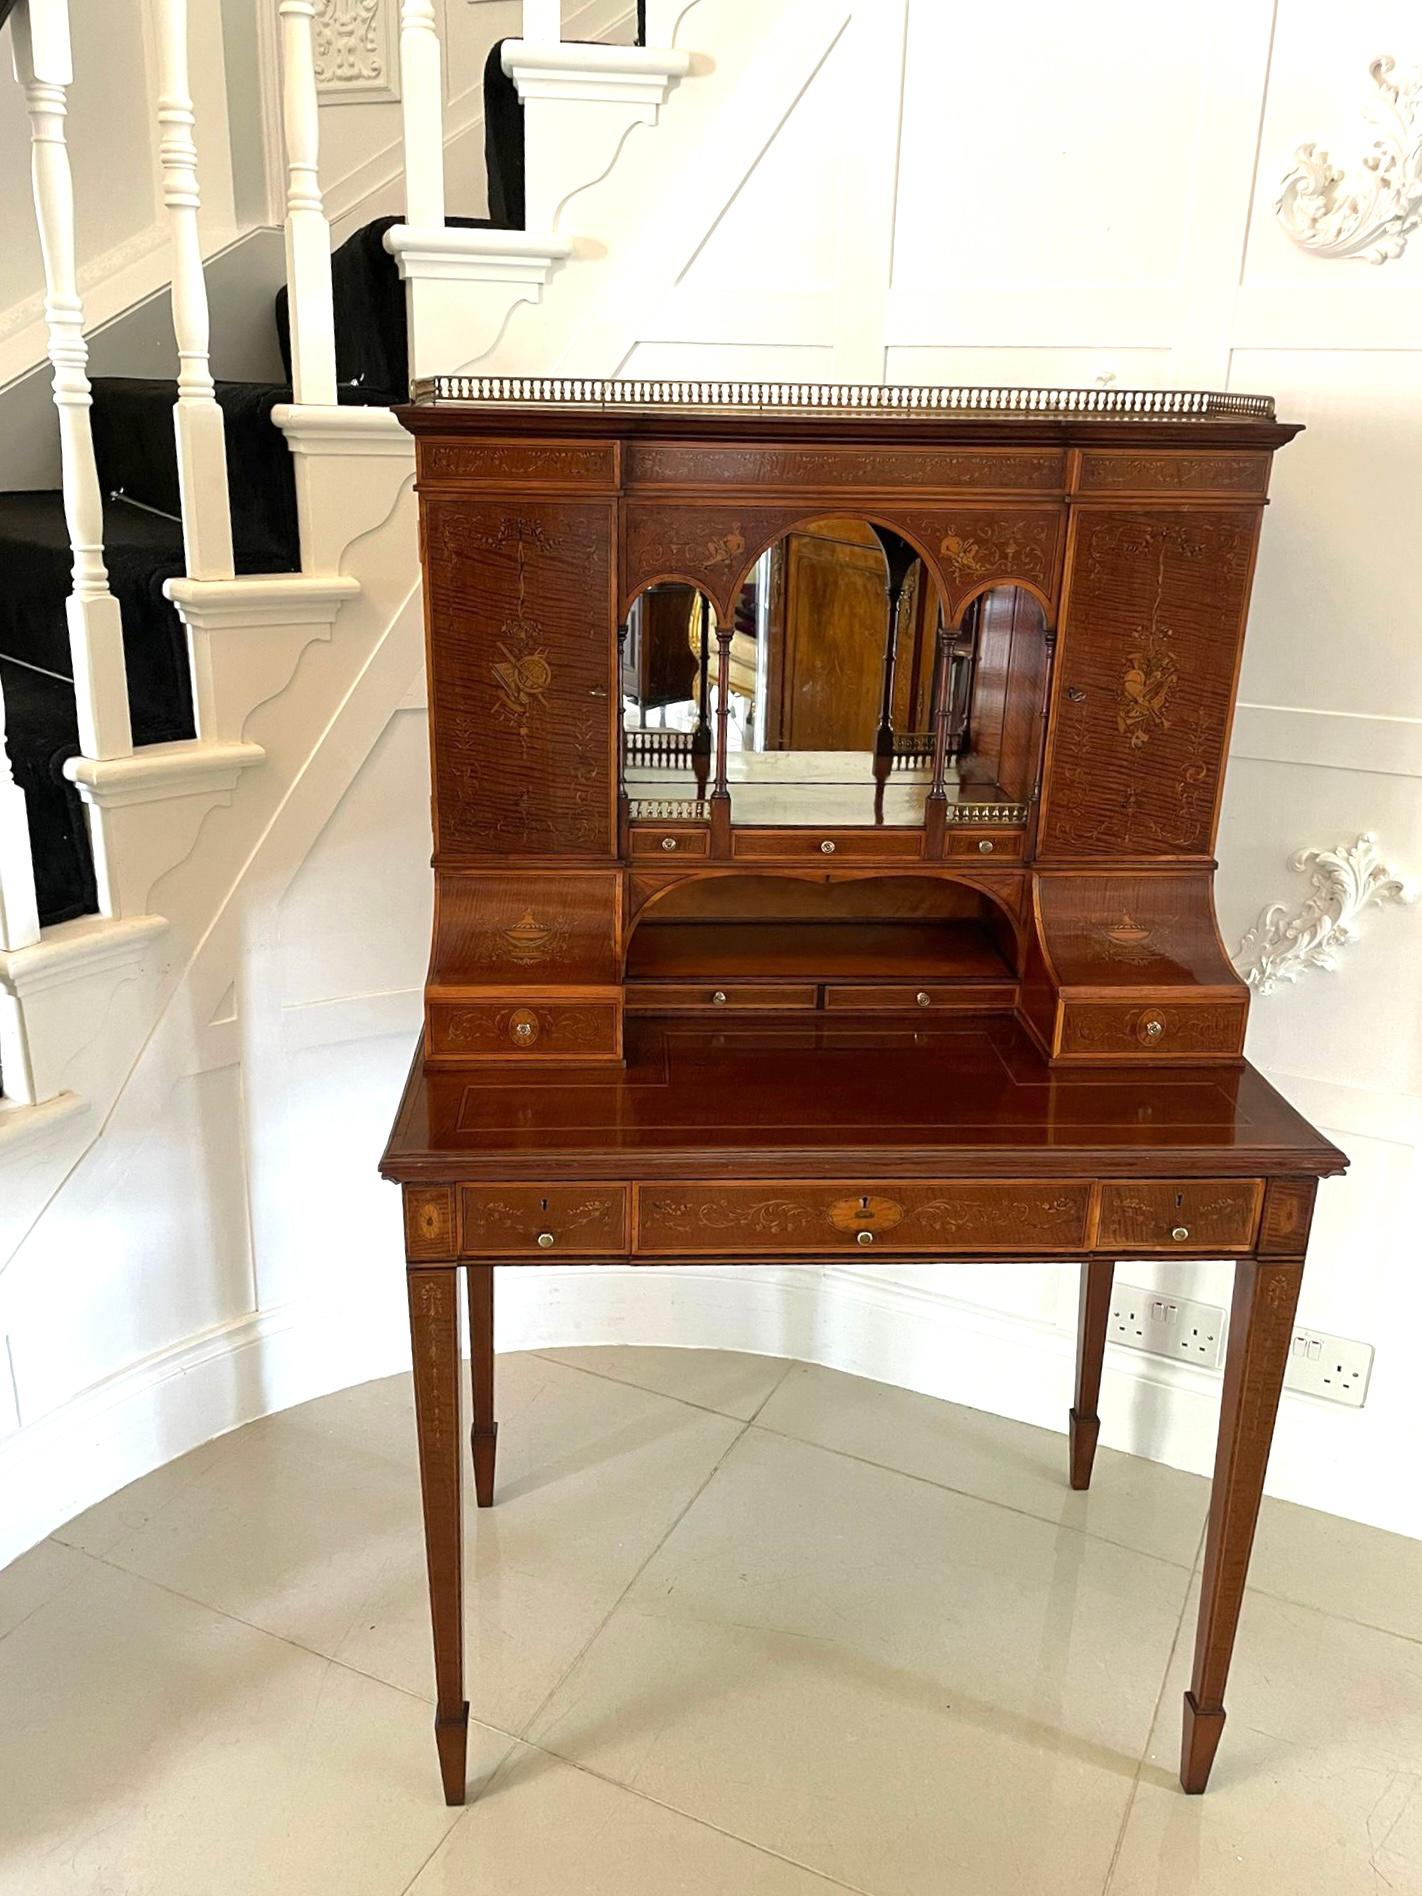 Outstanding quality antique Victorian inlaid mahogany freestanding desk the superstructure having the original brass gallery to the breakfront top above an arched mirror backed recess over three shallow drawers, original brass handles and further